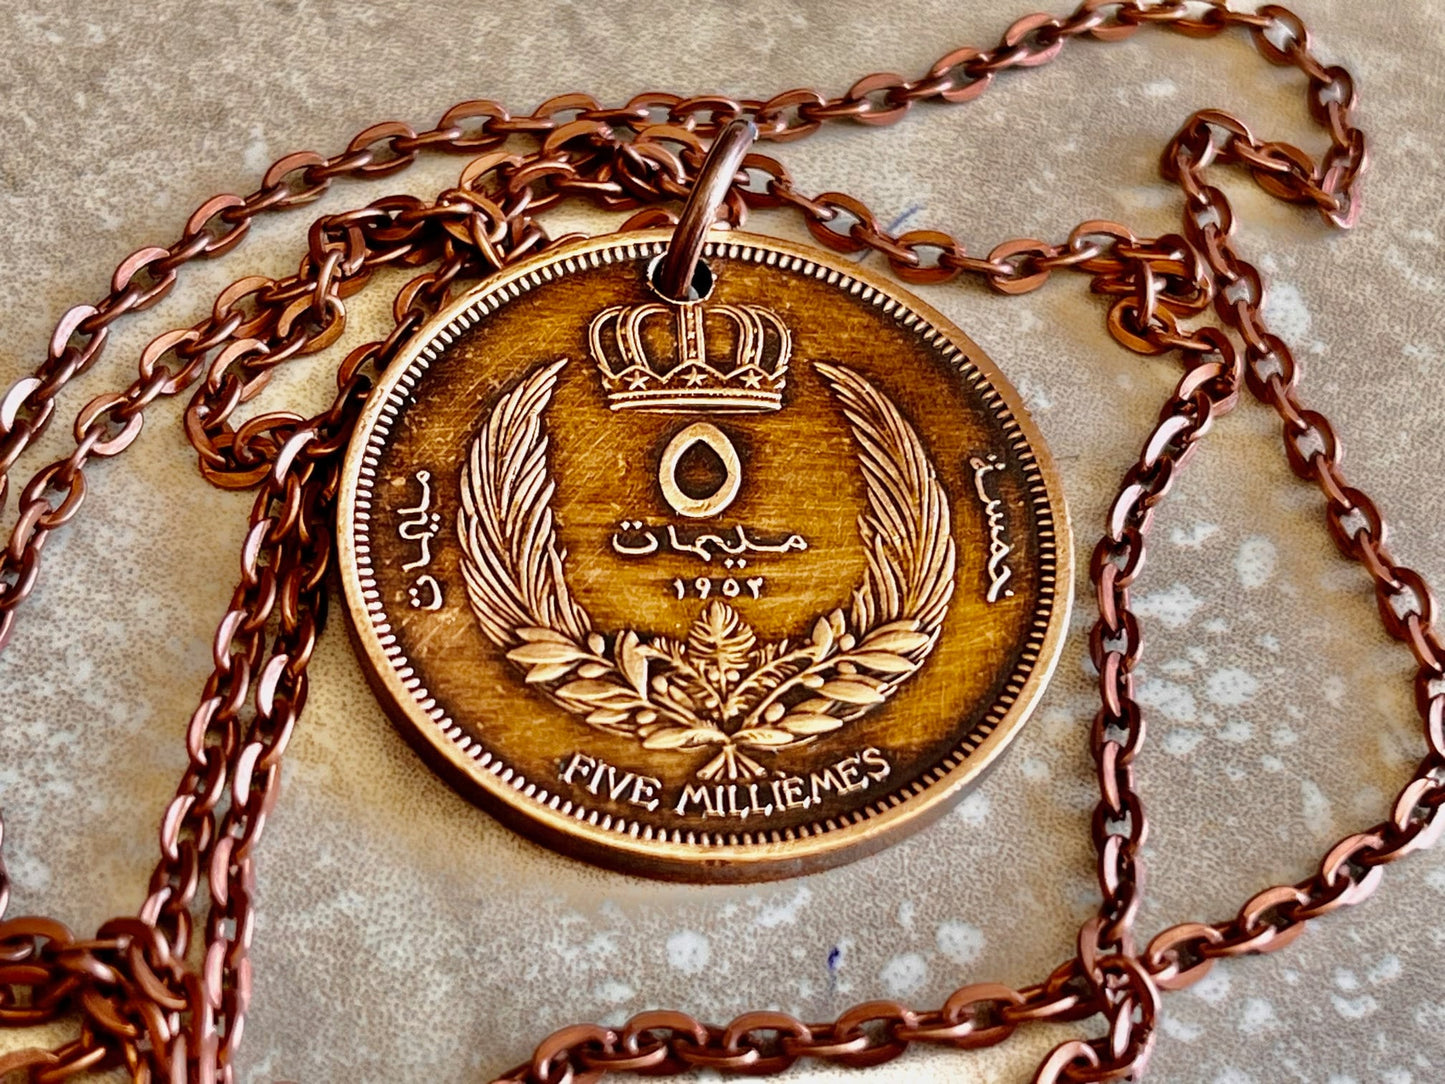 Libya Coin Pendant Libyan 5 Milliemes Personal Necklace Old Vintage Handmade Jewelry Gift Friend Charm For Him Her World Coin Collector